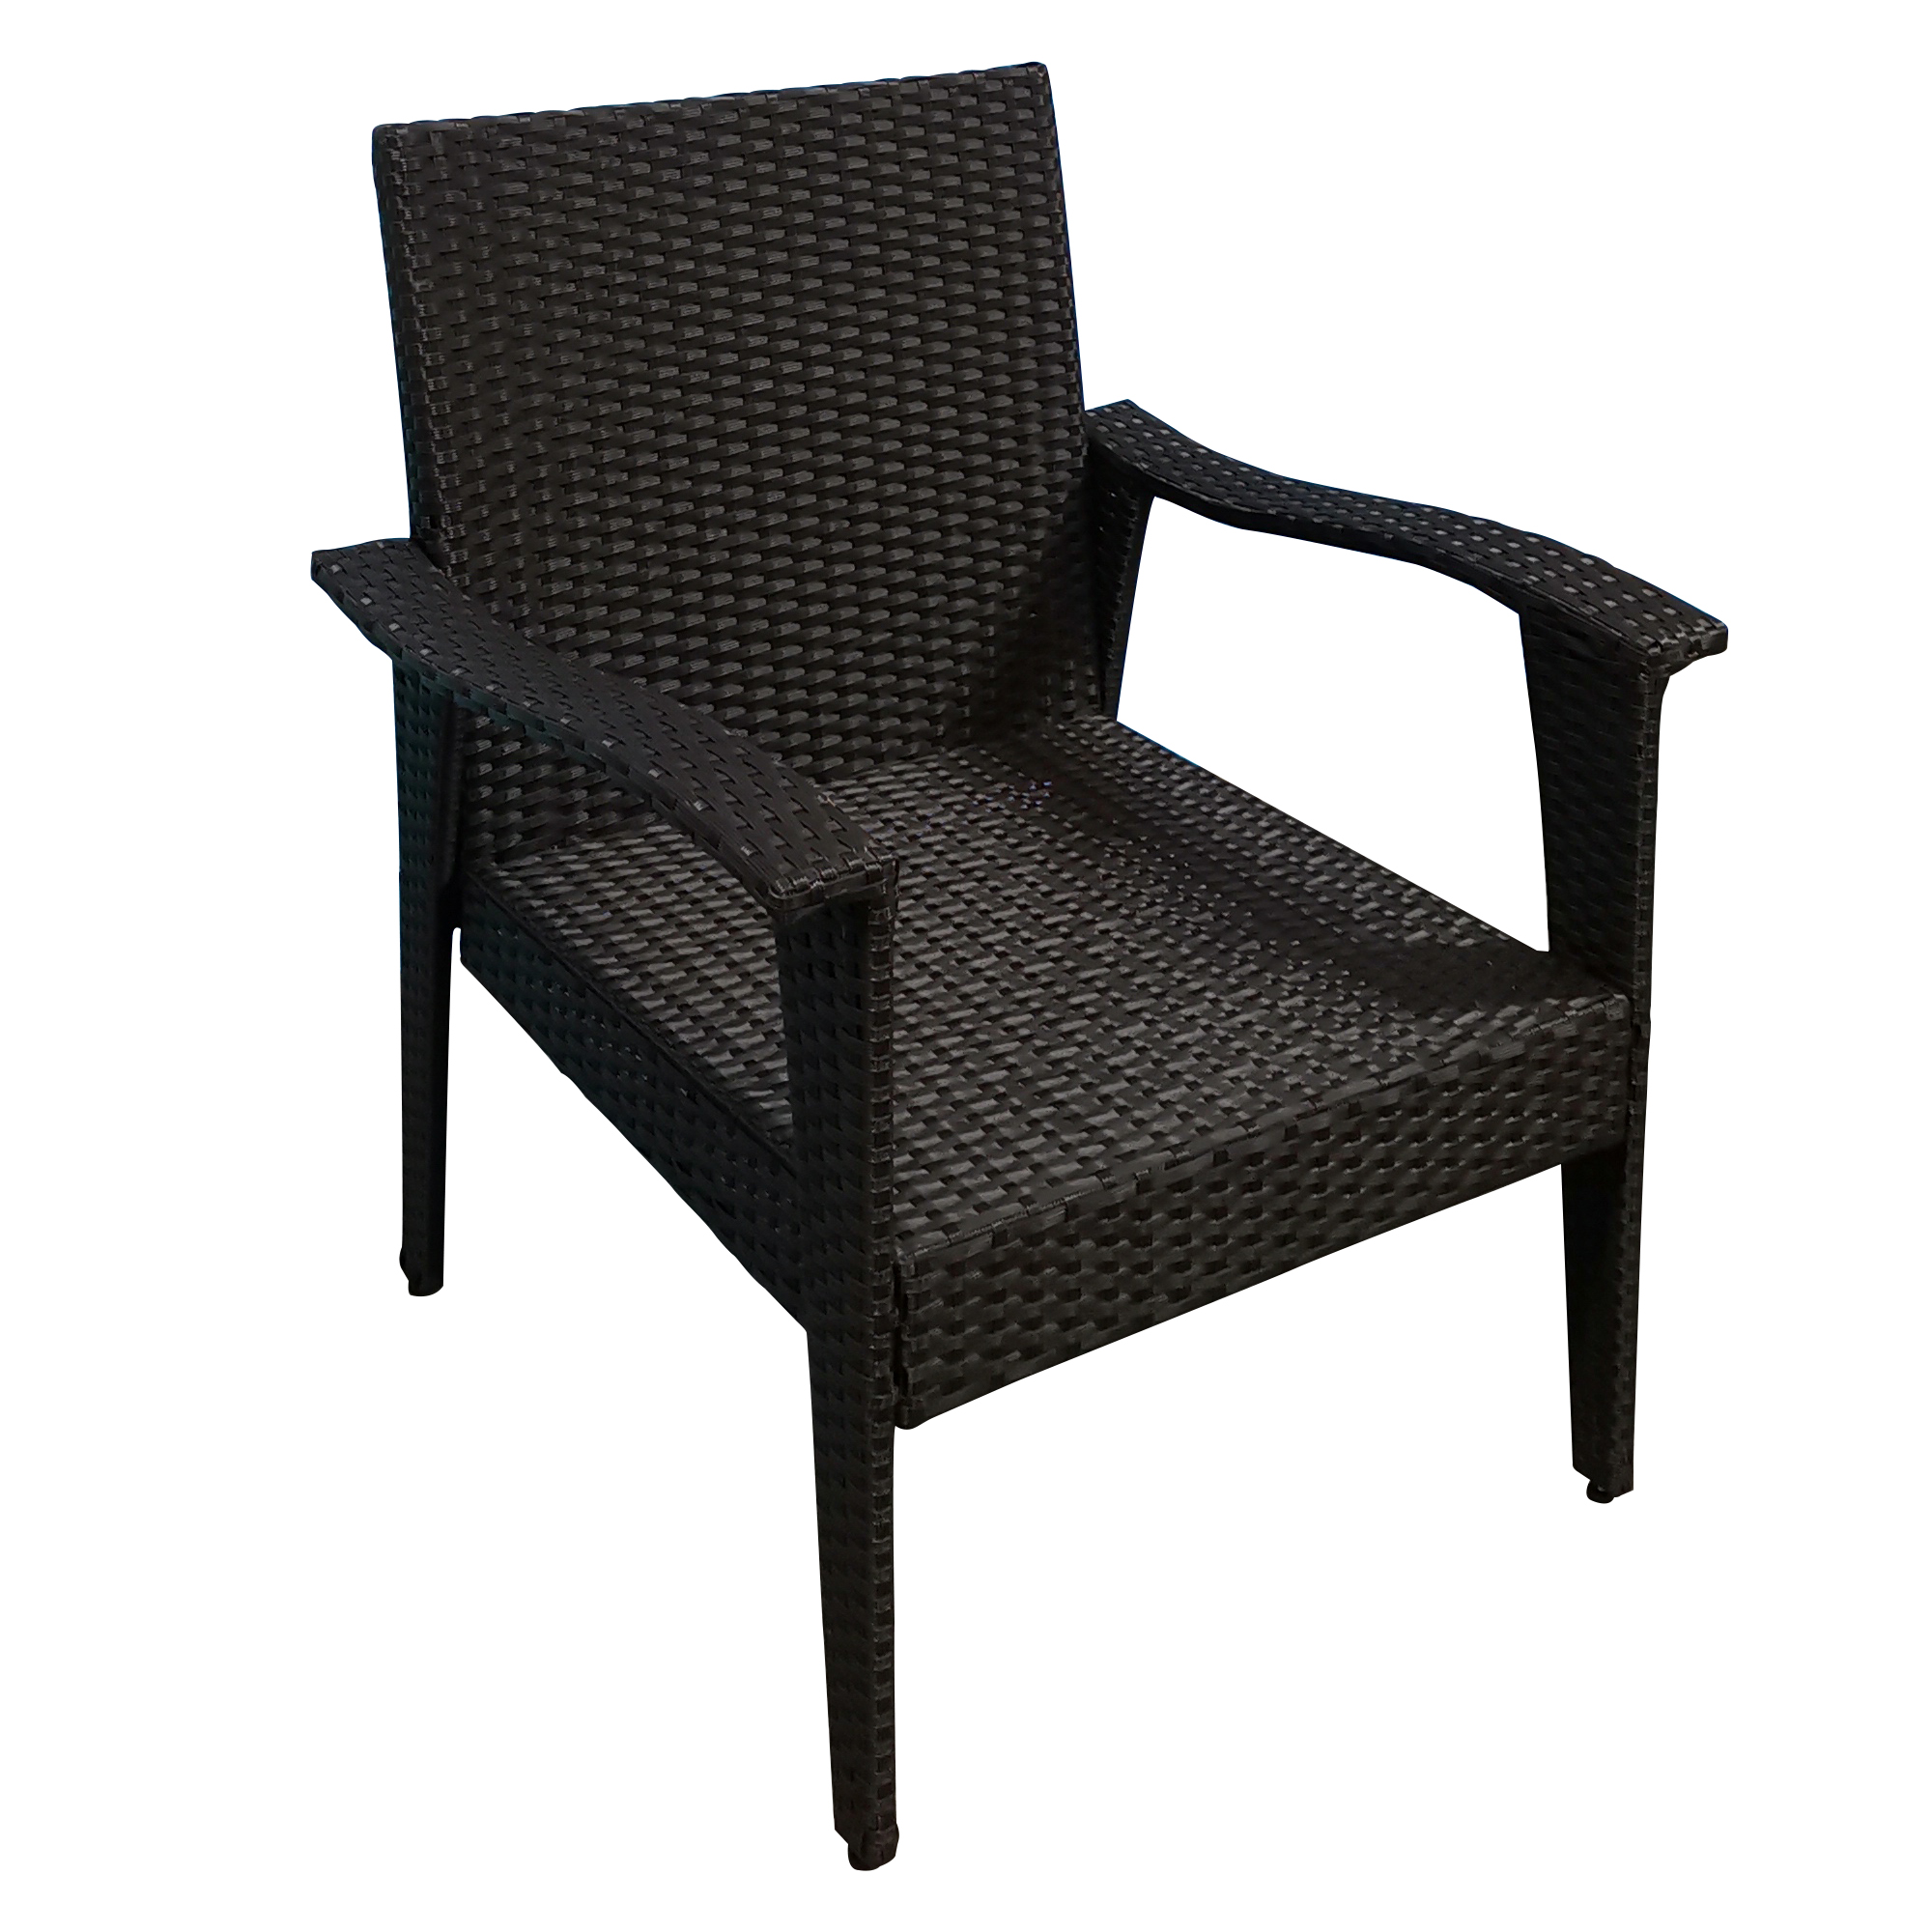 Outdoor Patio Chairs Rattan Wicker Patio Chaise Lounges Chair Patio Lounger Furniture with 5-Level Adjustable Backrest & Removable Cushioned Seating for Garden Poolside Patio Pool Beach - image 3 of 7